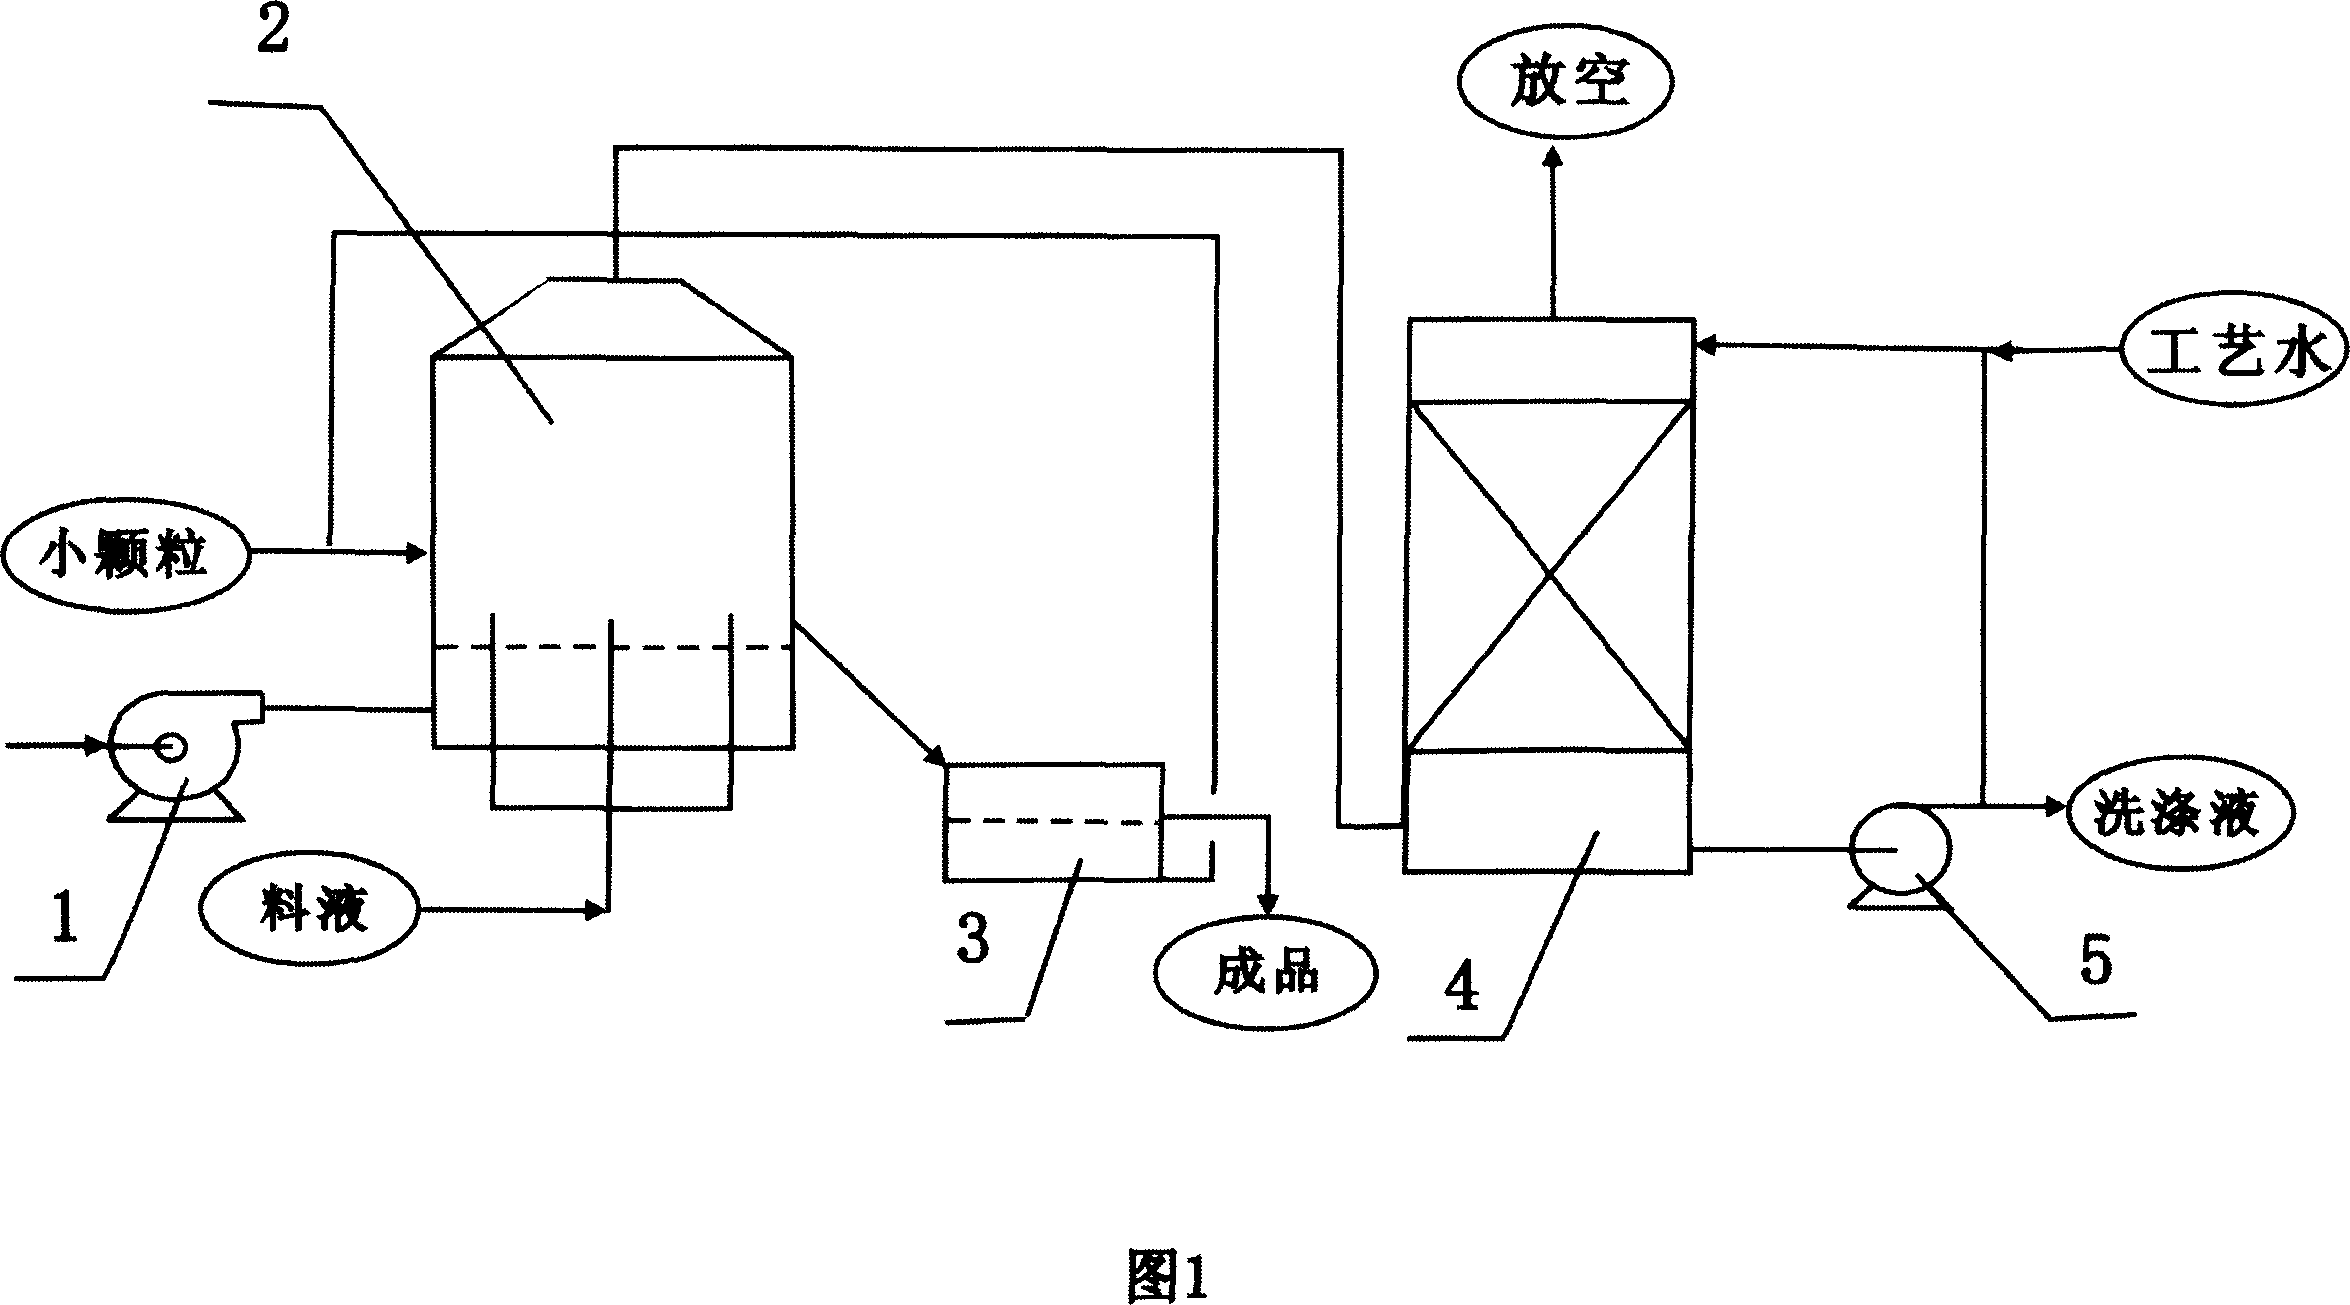 Technological method of improving small particle product strength and elliminating product dust